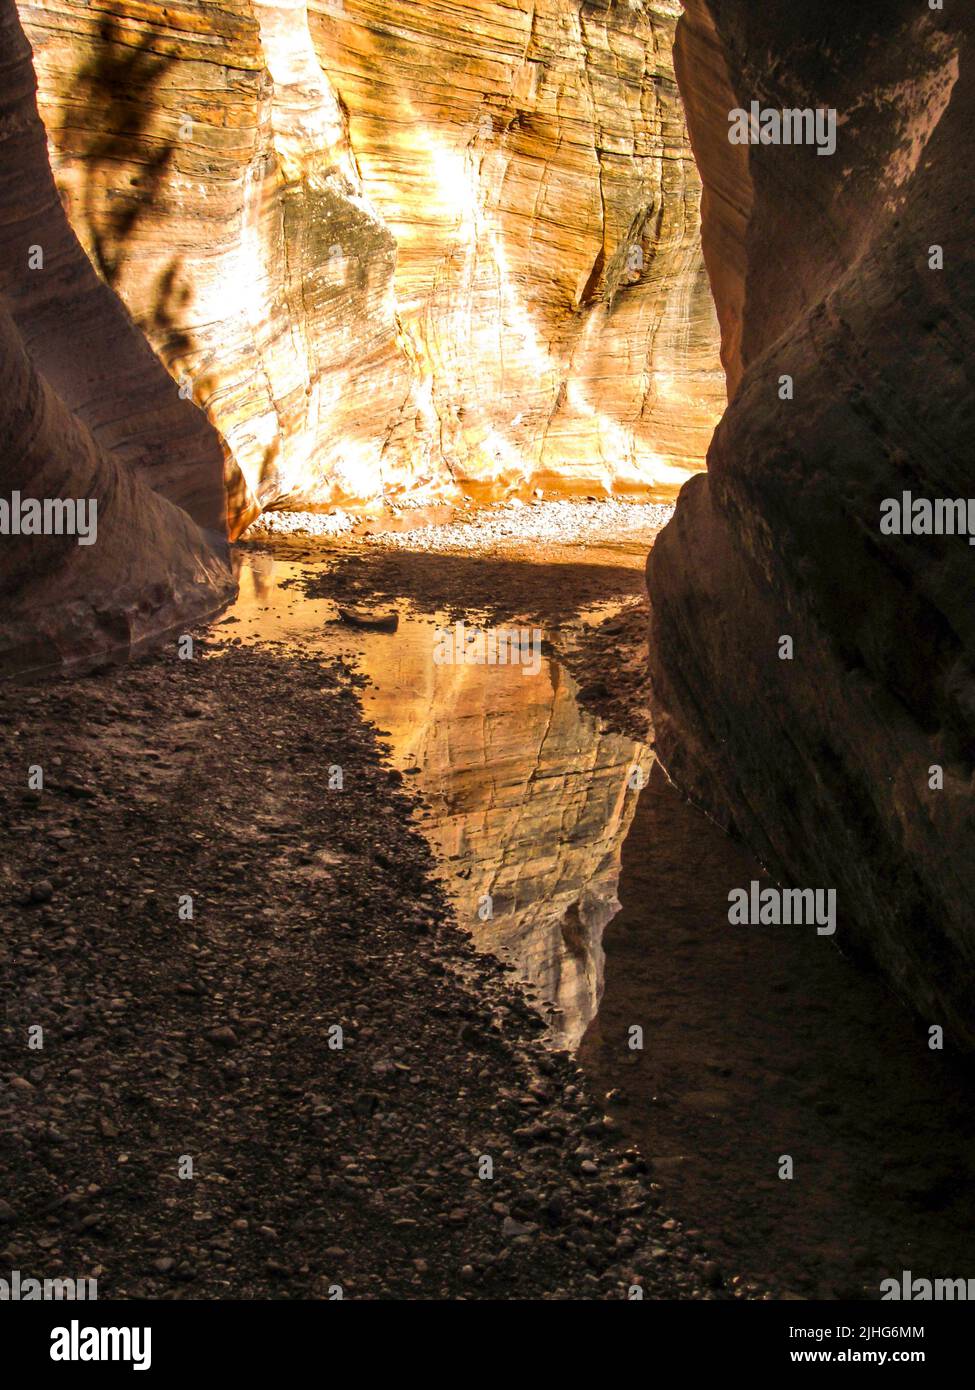 The Golden doorway. The golden sandstone cliff, reflecting in Willis Creek, as seen out of a Slot Canyon, Utah Stock Photo